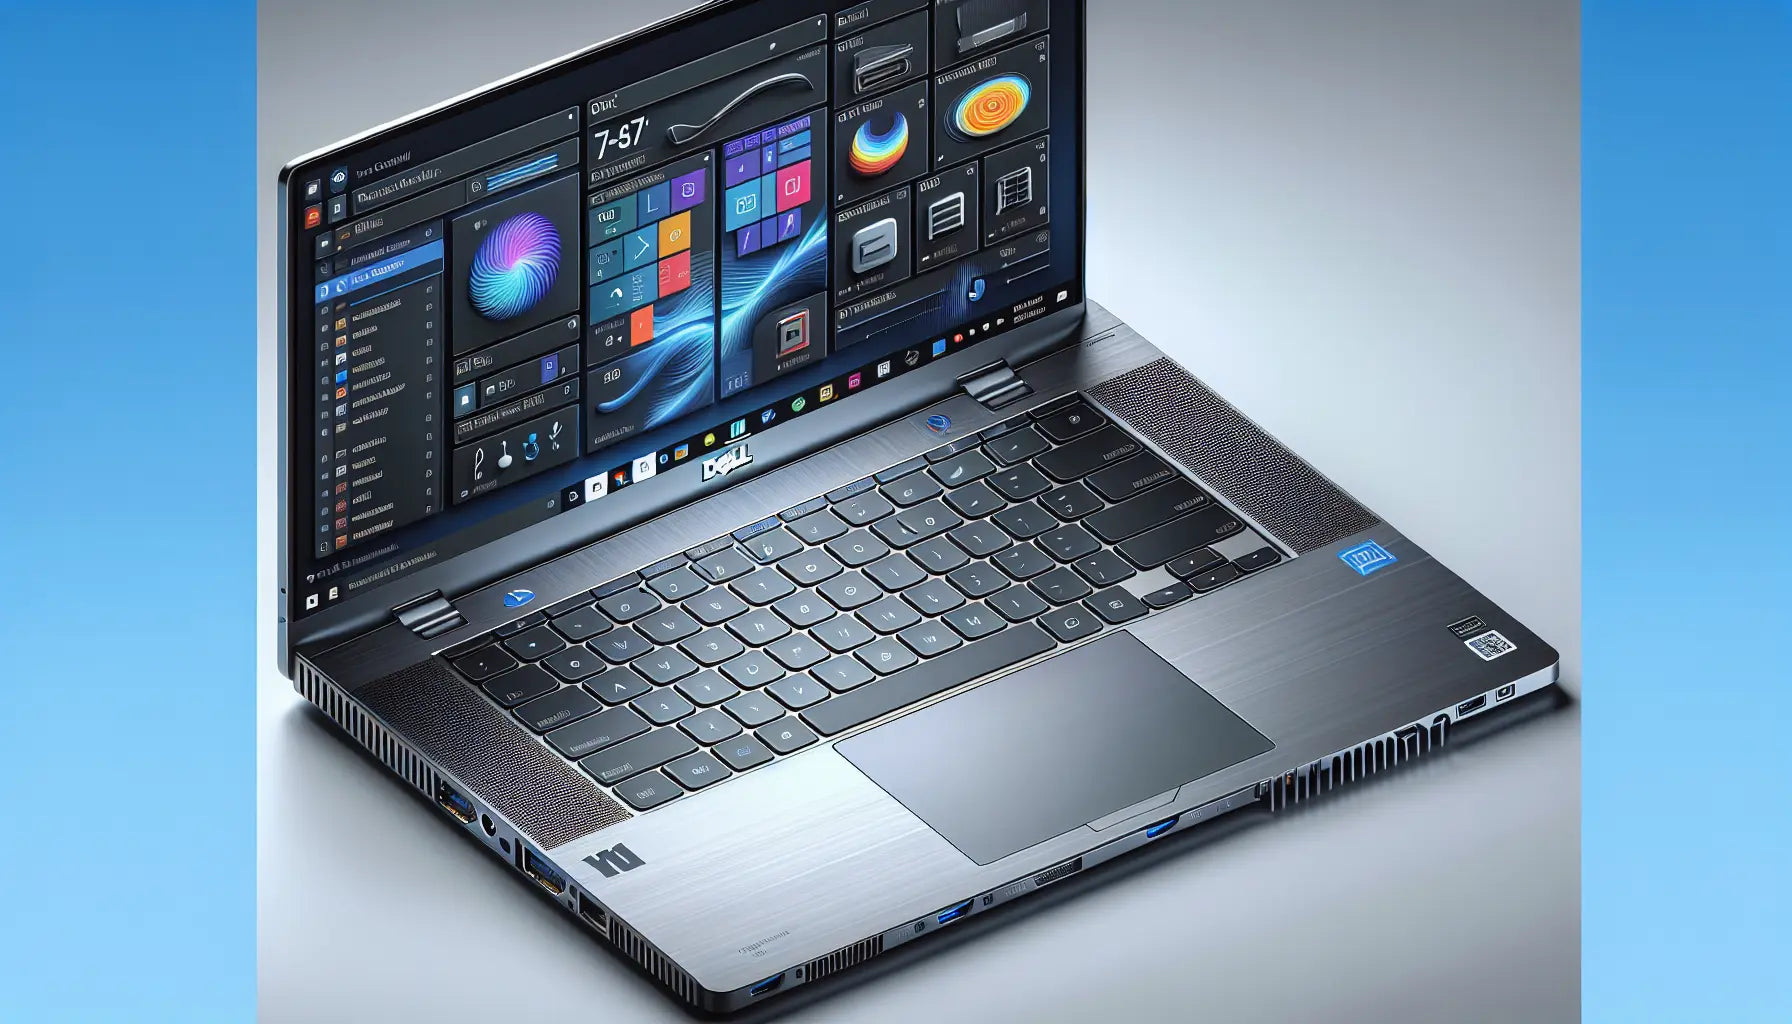 Discover the Power of the Dell Latitude E7480 I7 6th Gen, 256GBSSD, 8GB Ram Laptop